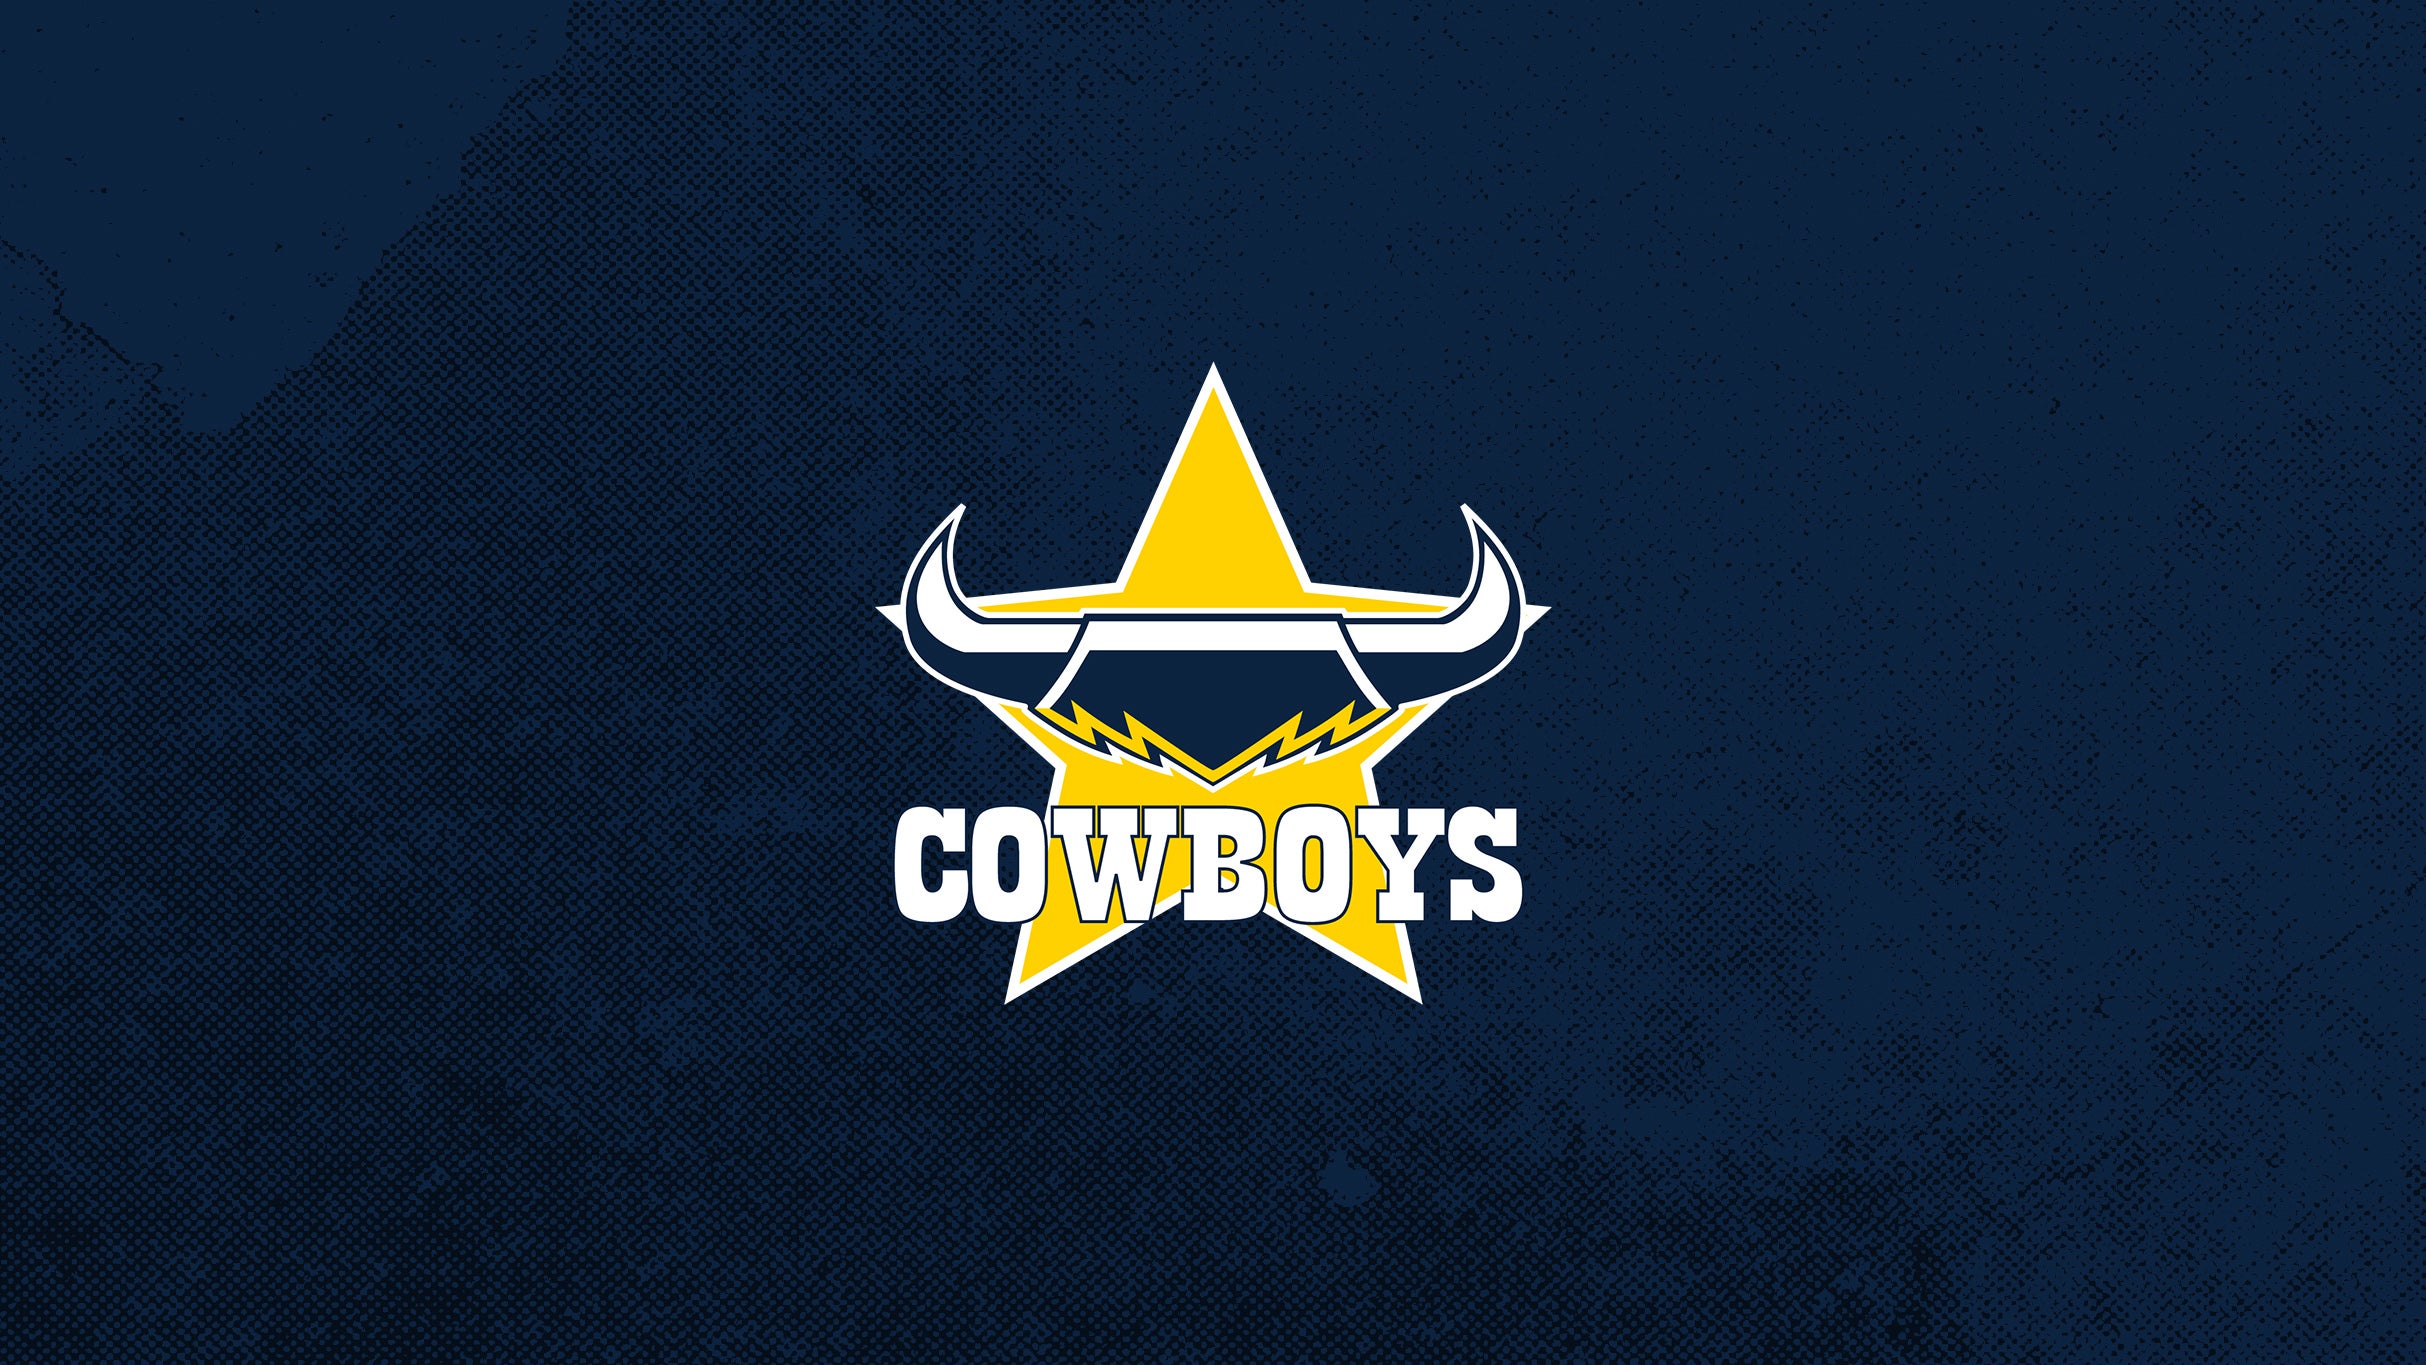 North Queensland Toyota Cowboys v Brisbane Broncos (Round 23) in Townsville promo photo for Cowboys Members presale offer code